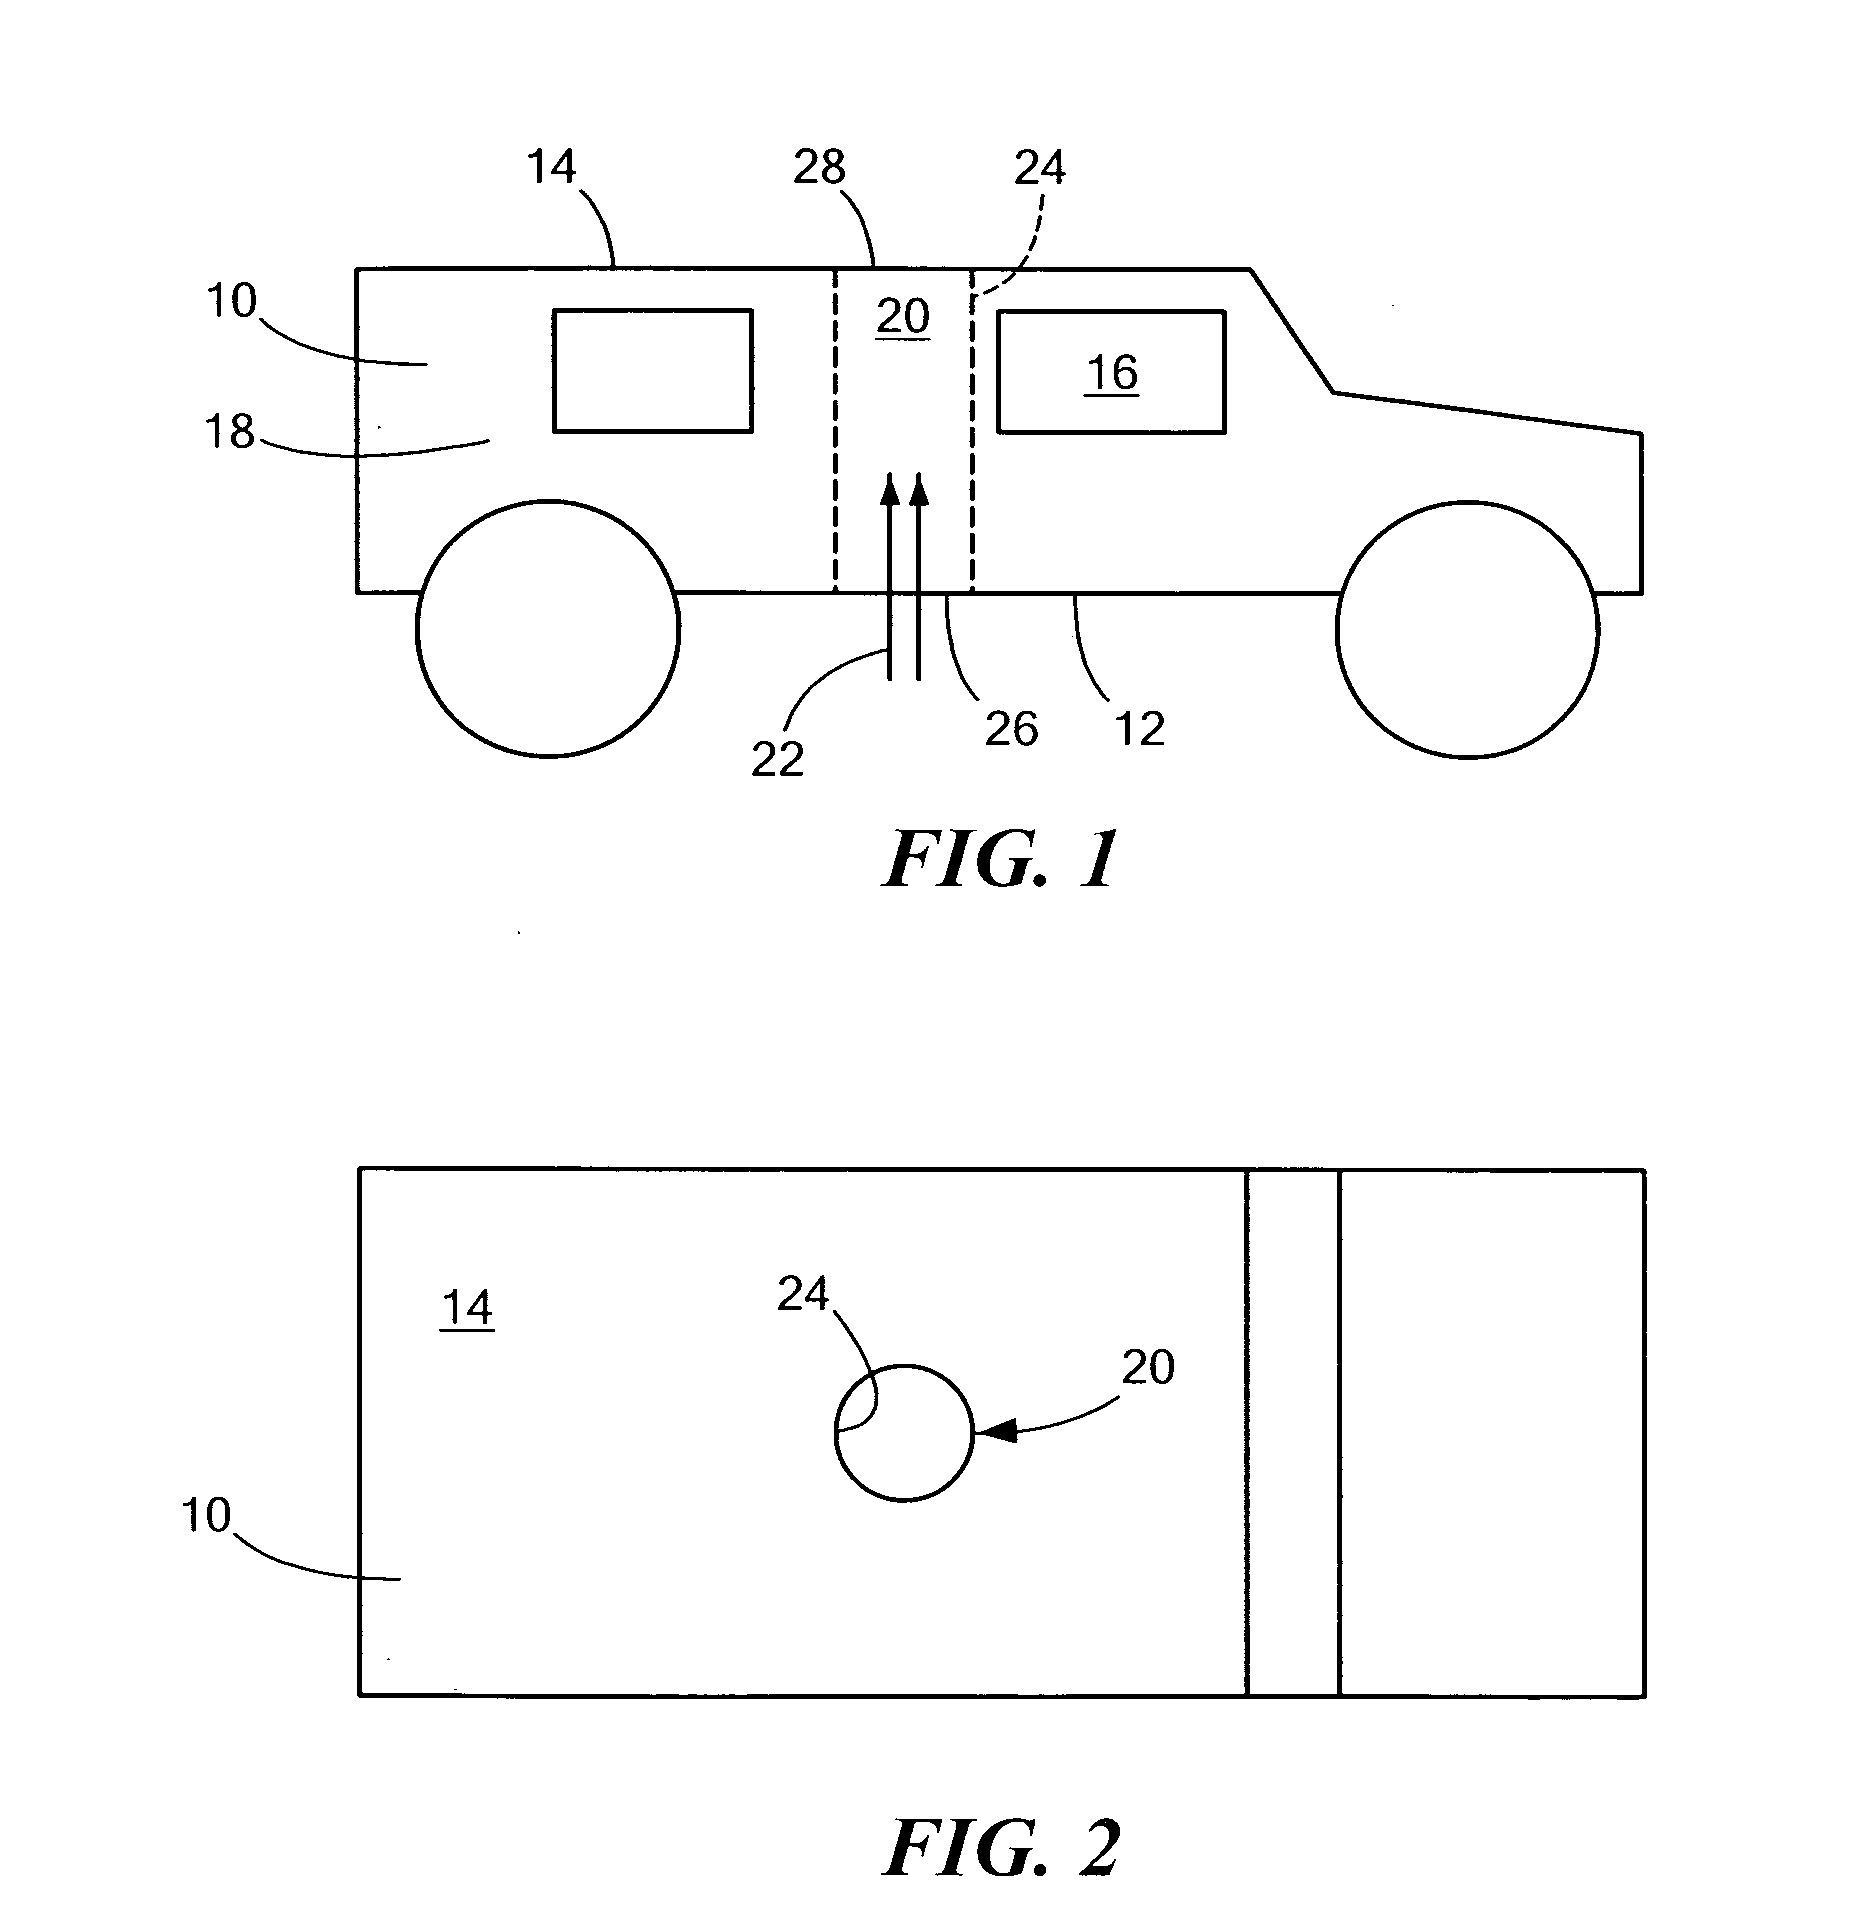 Vehicle with structural vent channels for blast energy and debris dissipation